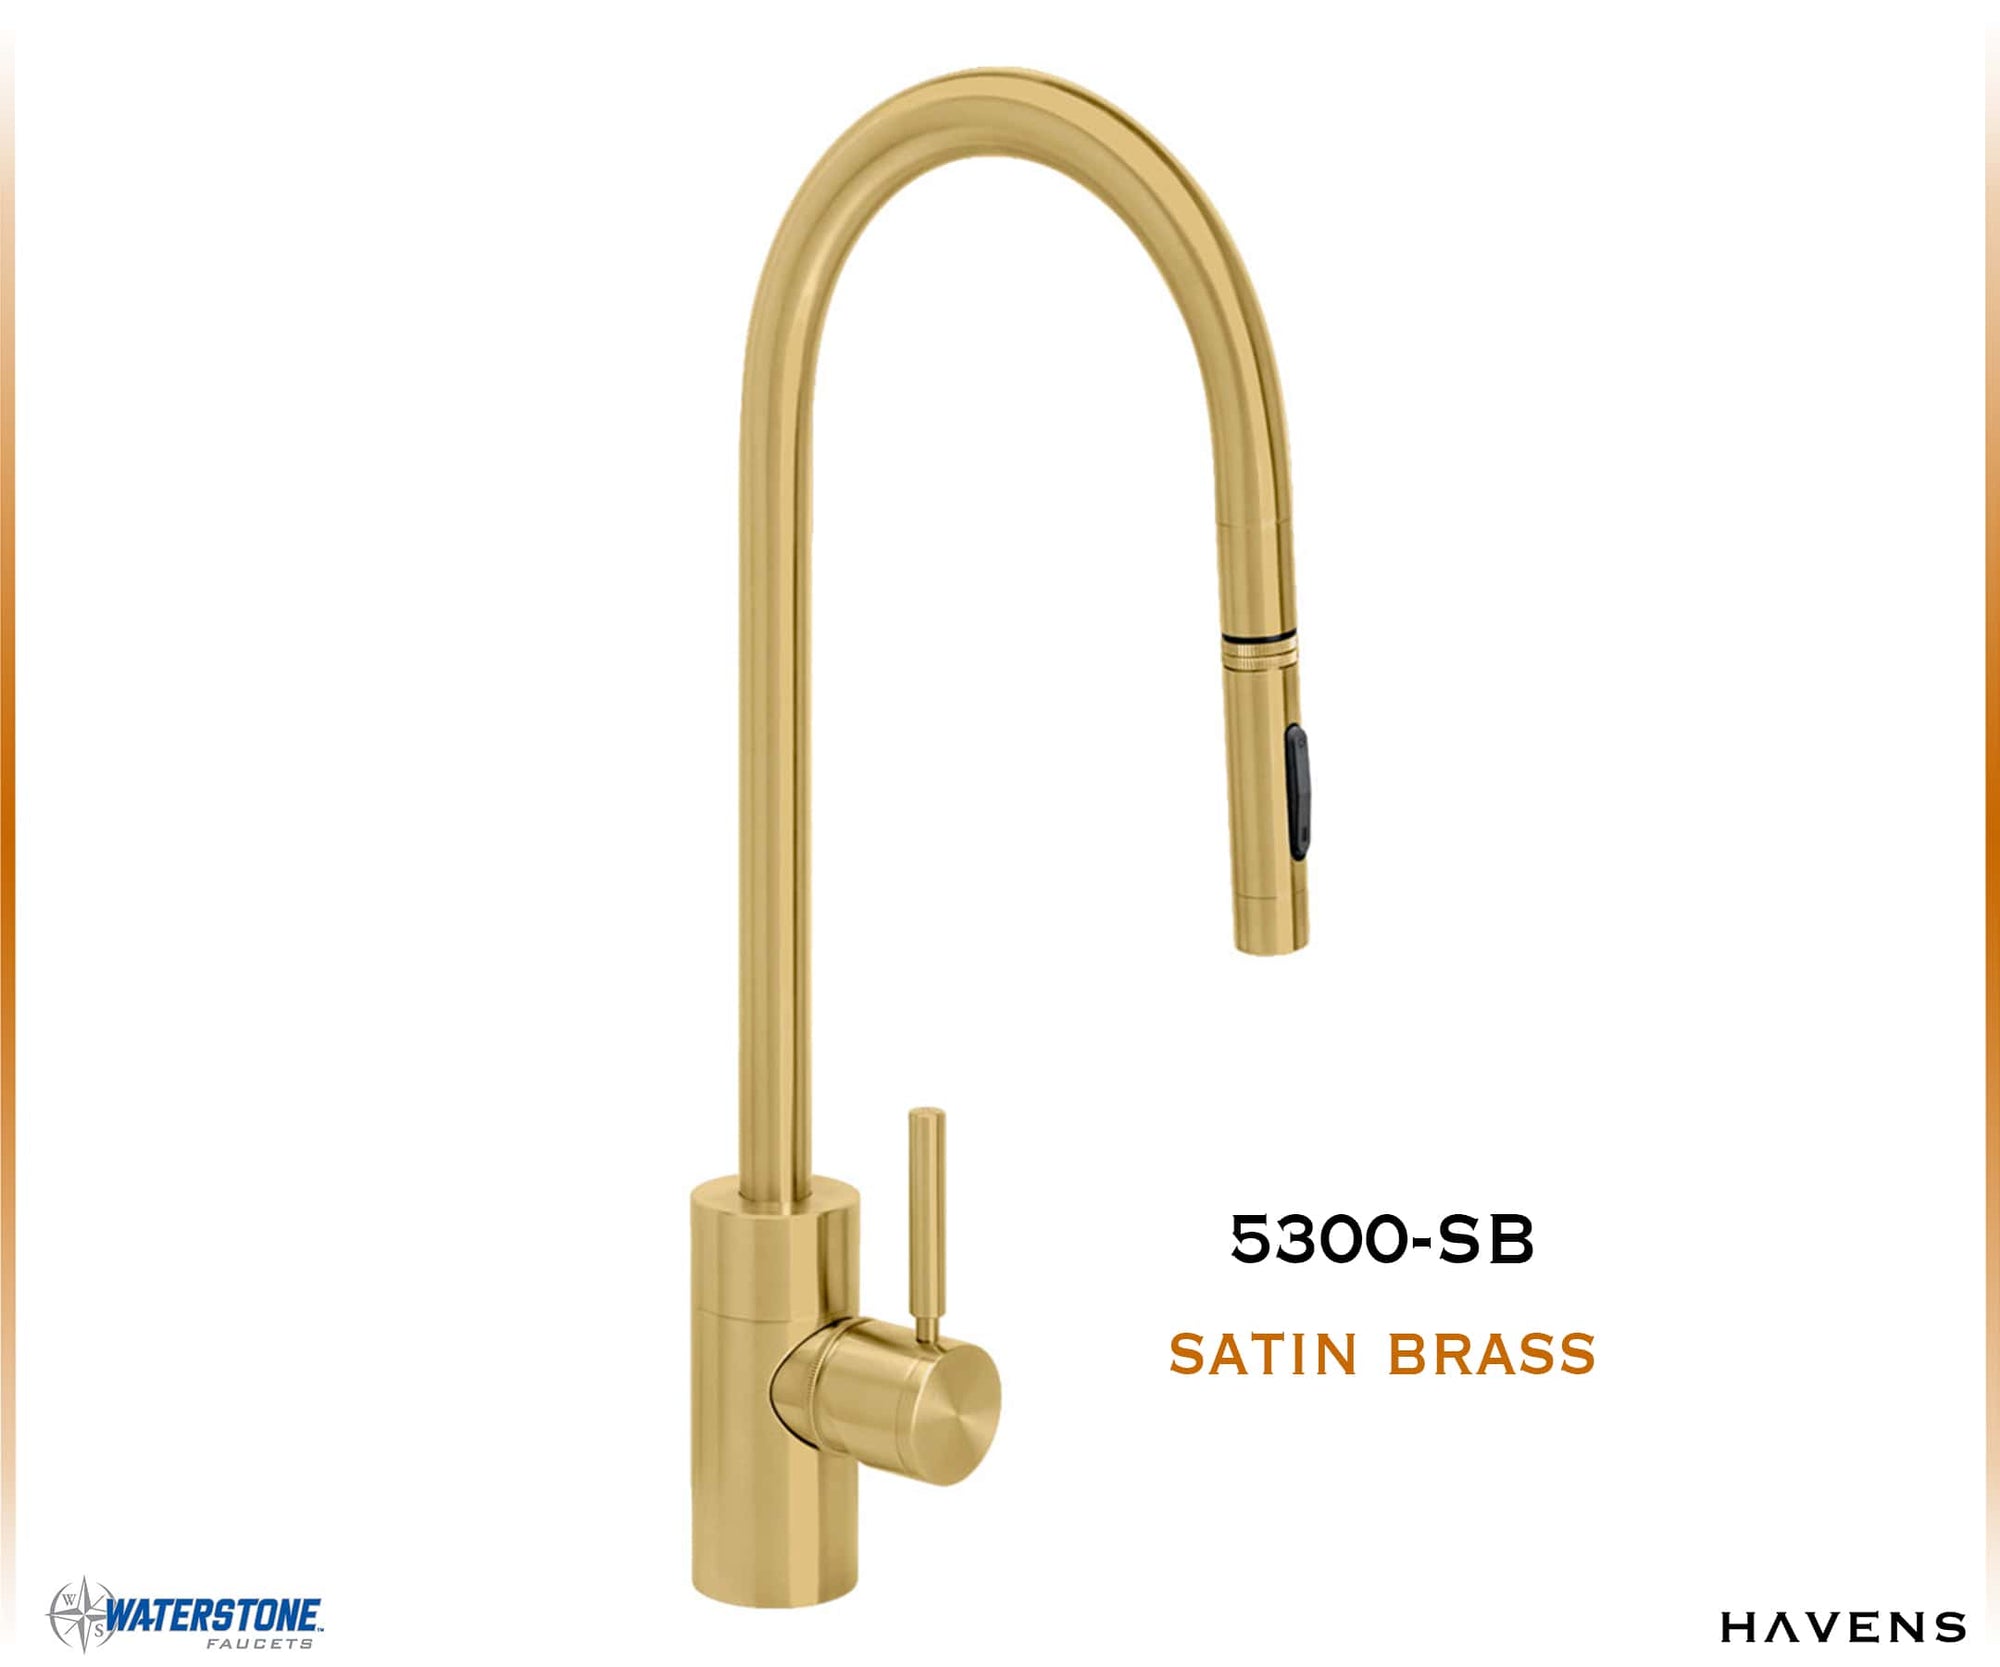 Waterstone Contemporary Extended Reach PLP Pulldown Faucet - 5300